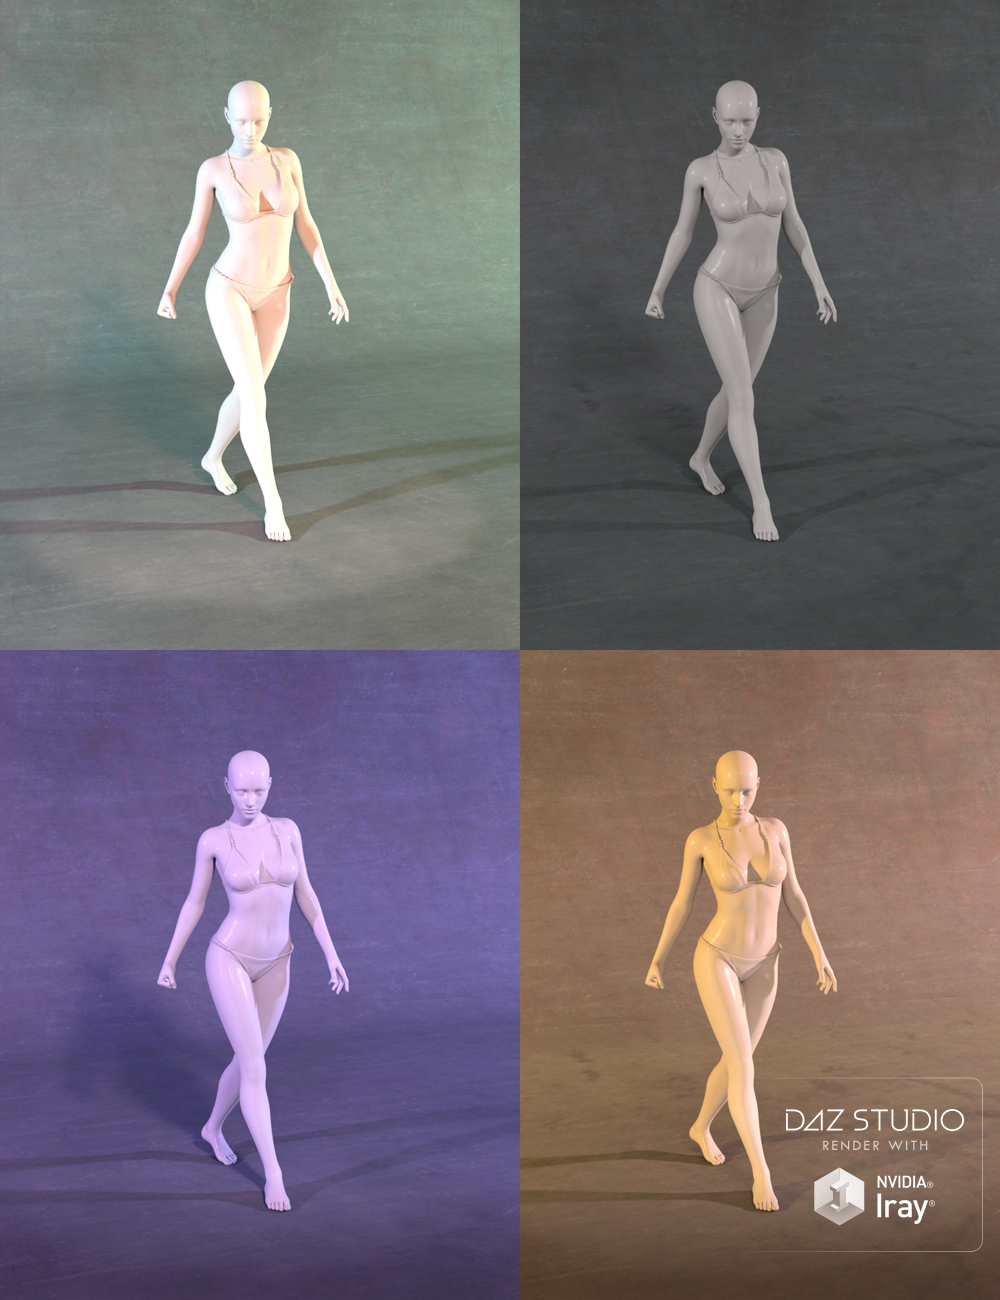 Muelsfell Heroic Studio Backdrops with Iray Presets by: E-Arkham, 3D Models by Daz 3D